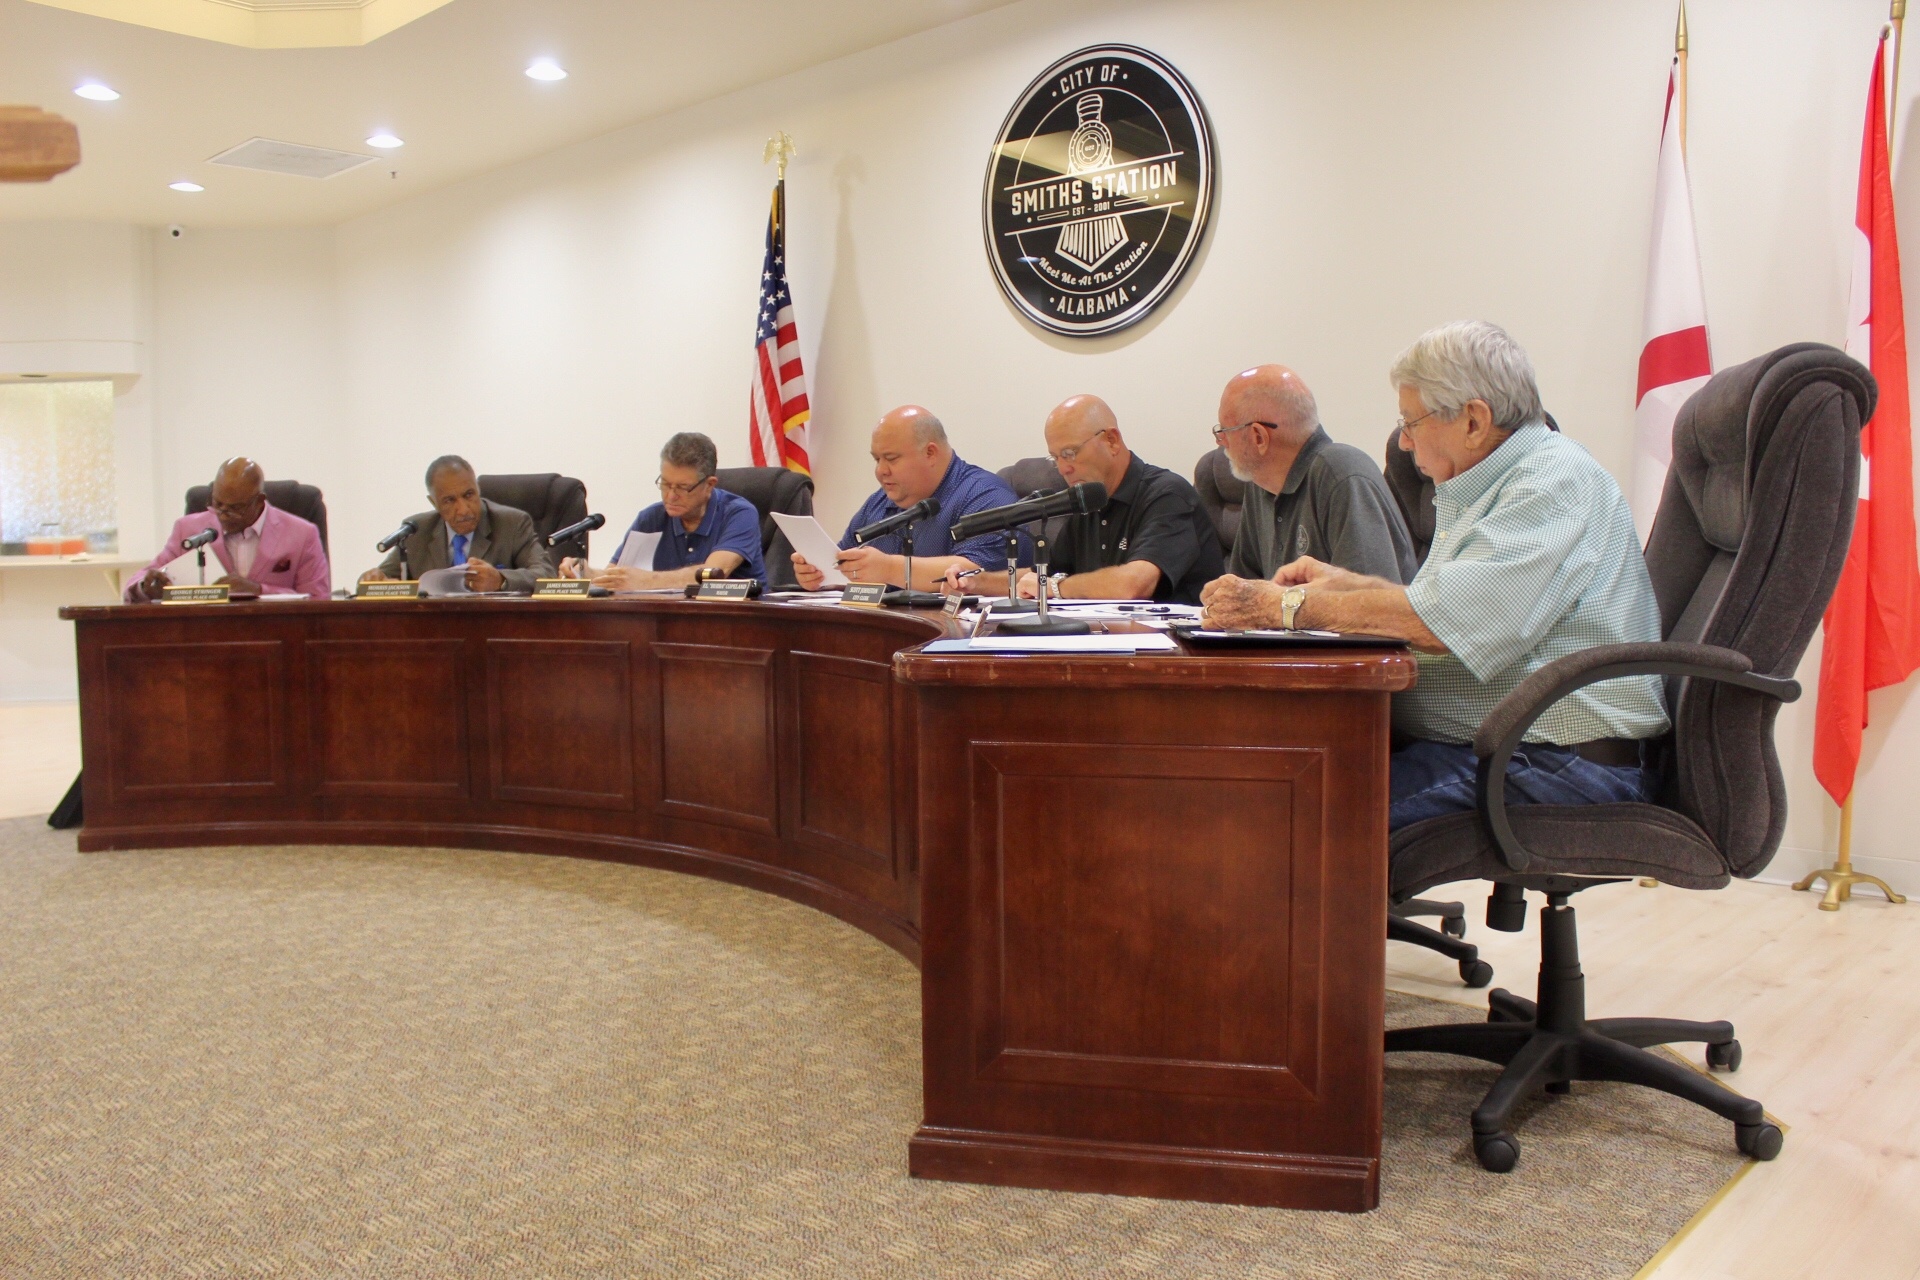 Smiths Station City Council approves new speed limit, funding for Christmas event